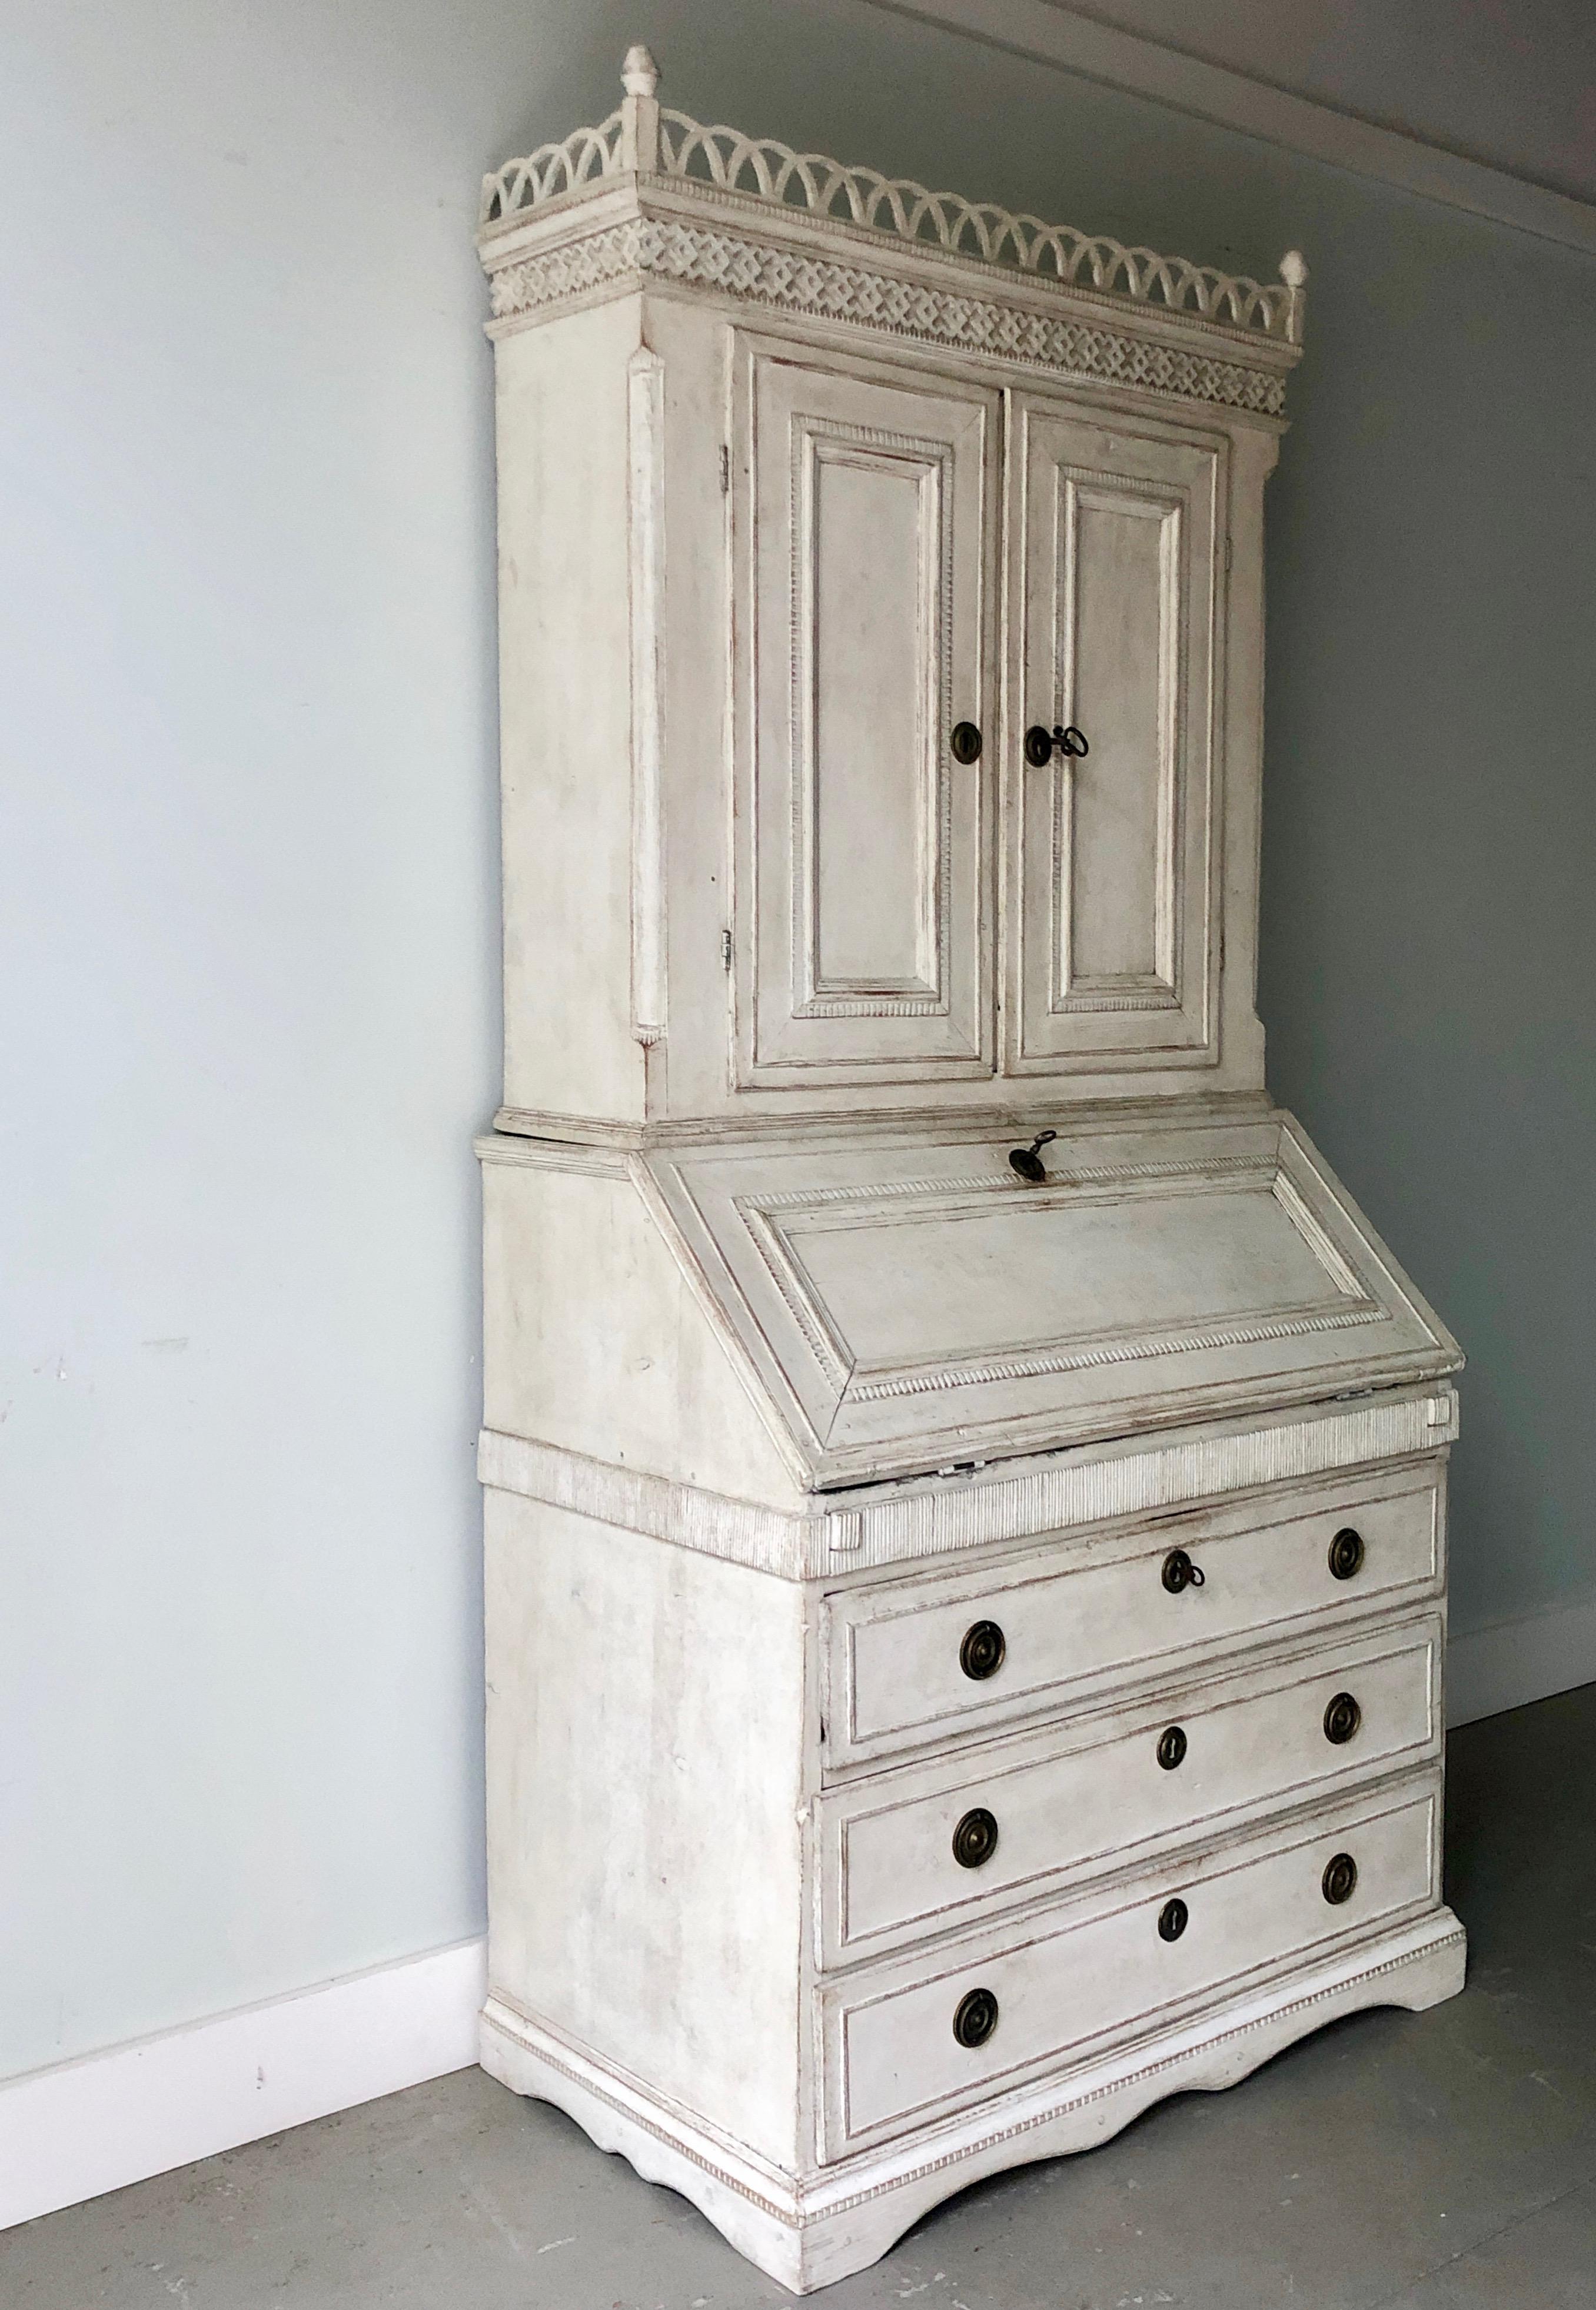 Very fine example of 18th century period Gustavian secretaire with richly carved balcony pediment cornice and fall front desk with multiple small compartments over a Classic three-drawer bureau on beautifully shaped skirt with feet, Sweden, circa